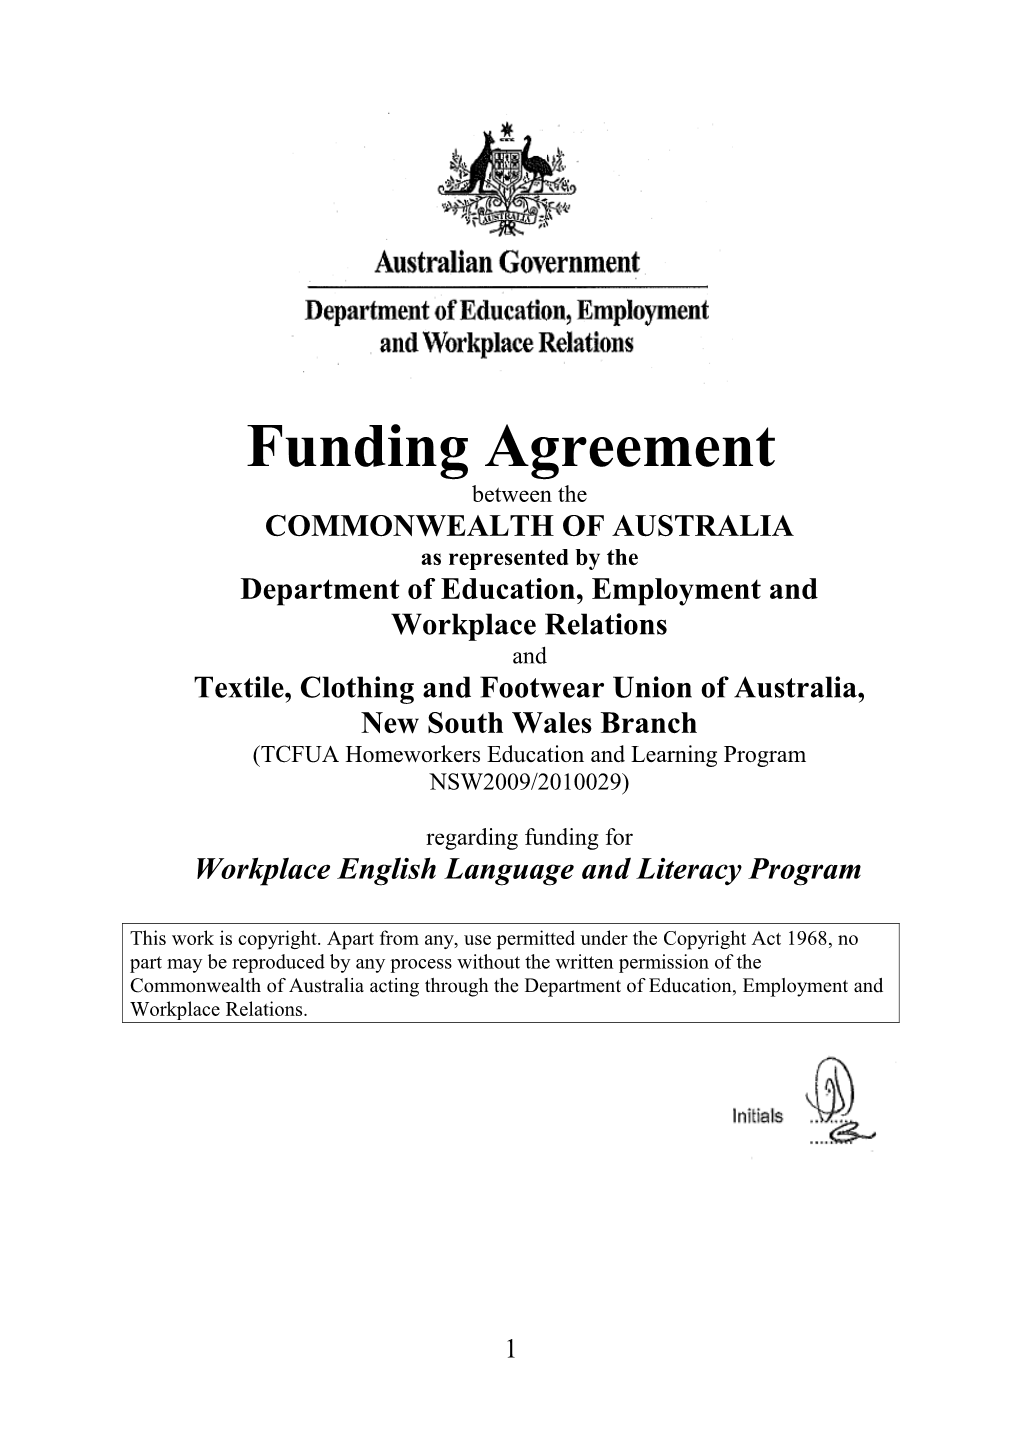 Payments to Textile Clothing and Footwear Union of Australia